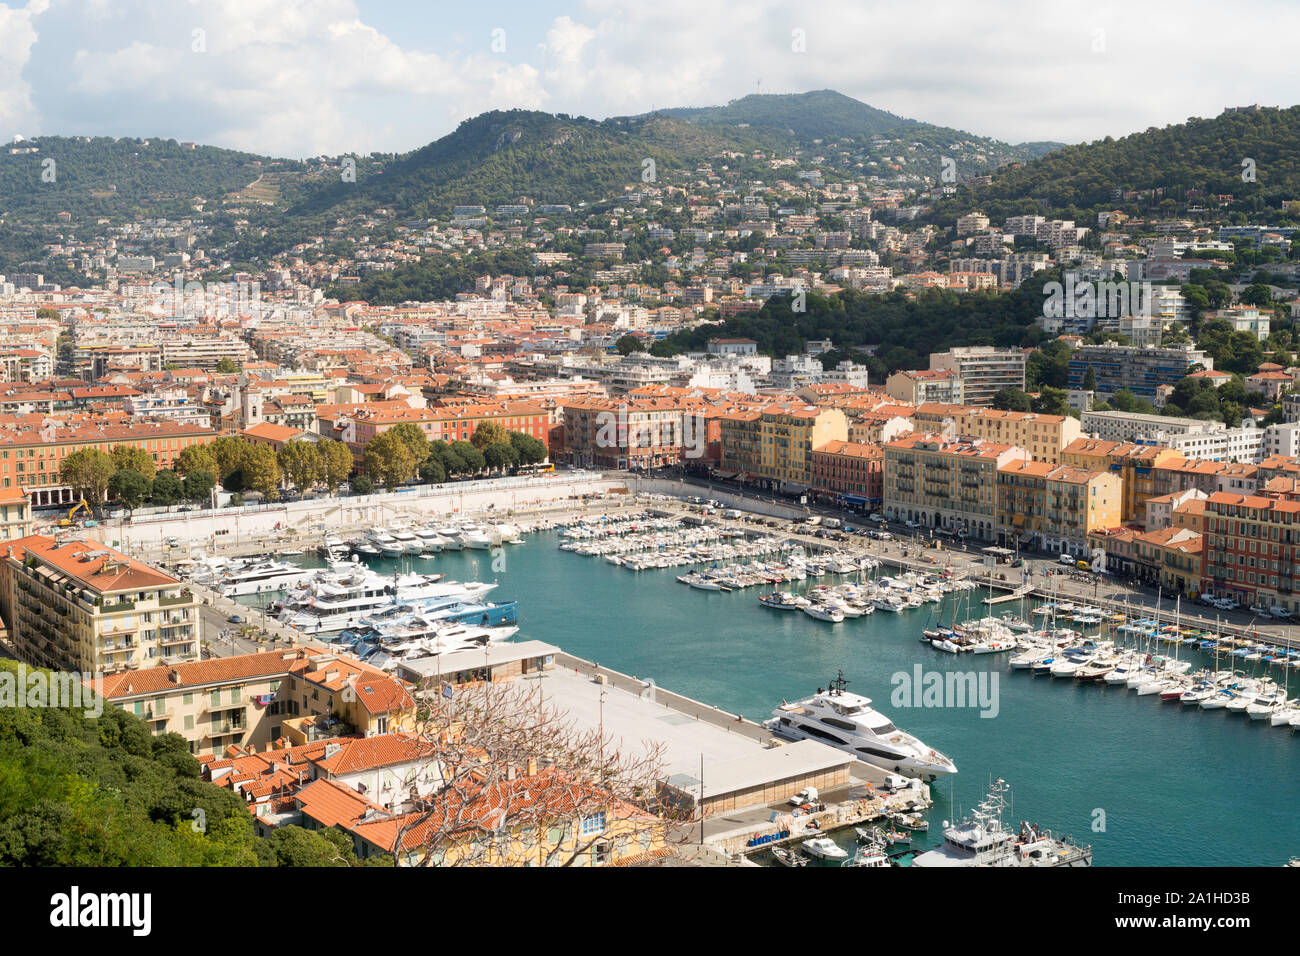 The old port or marina in Nice seen from above, France, Europe Stock Photo